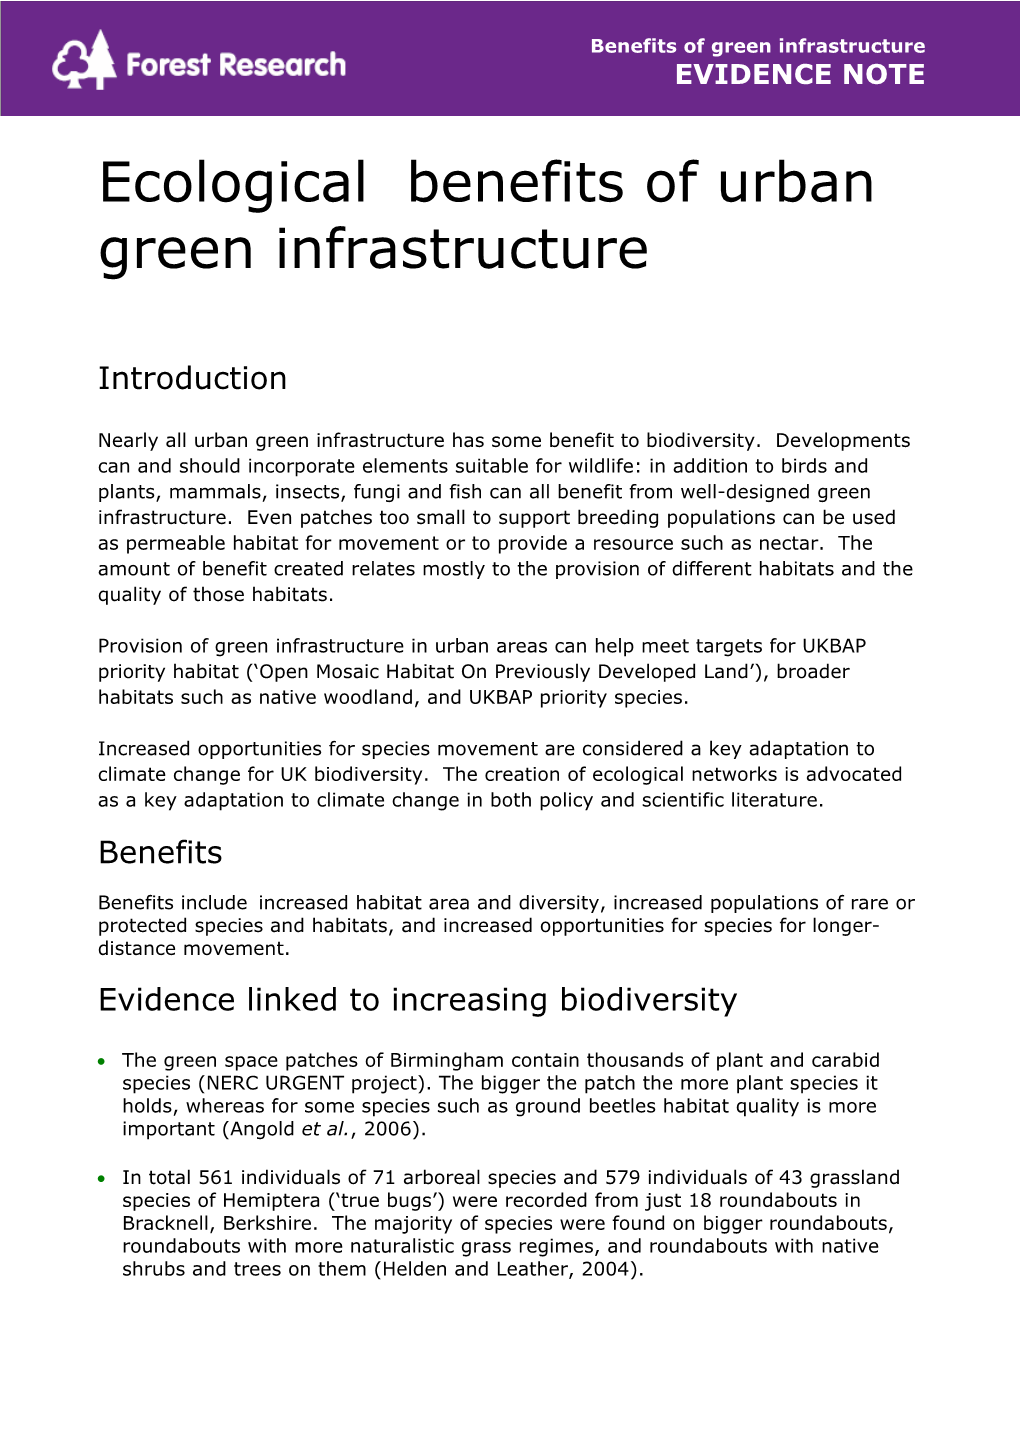 Ecological Benefits of Urban Green Infrastructure